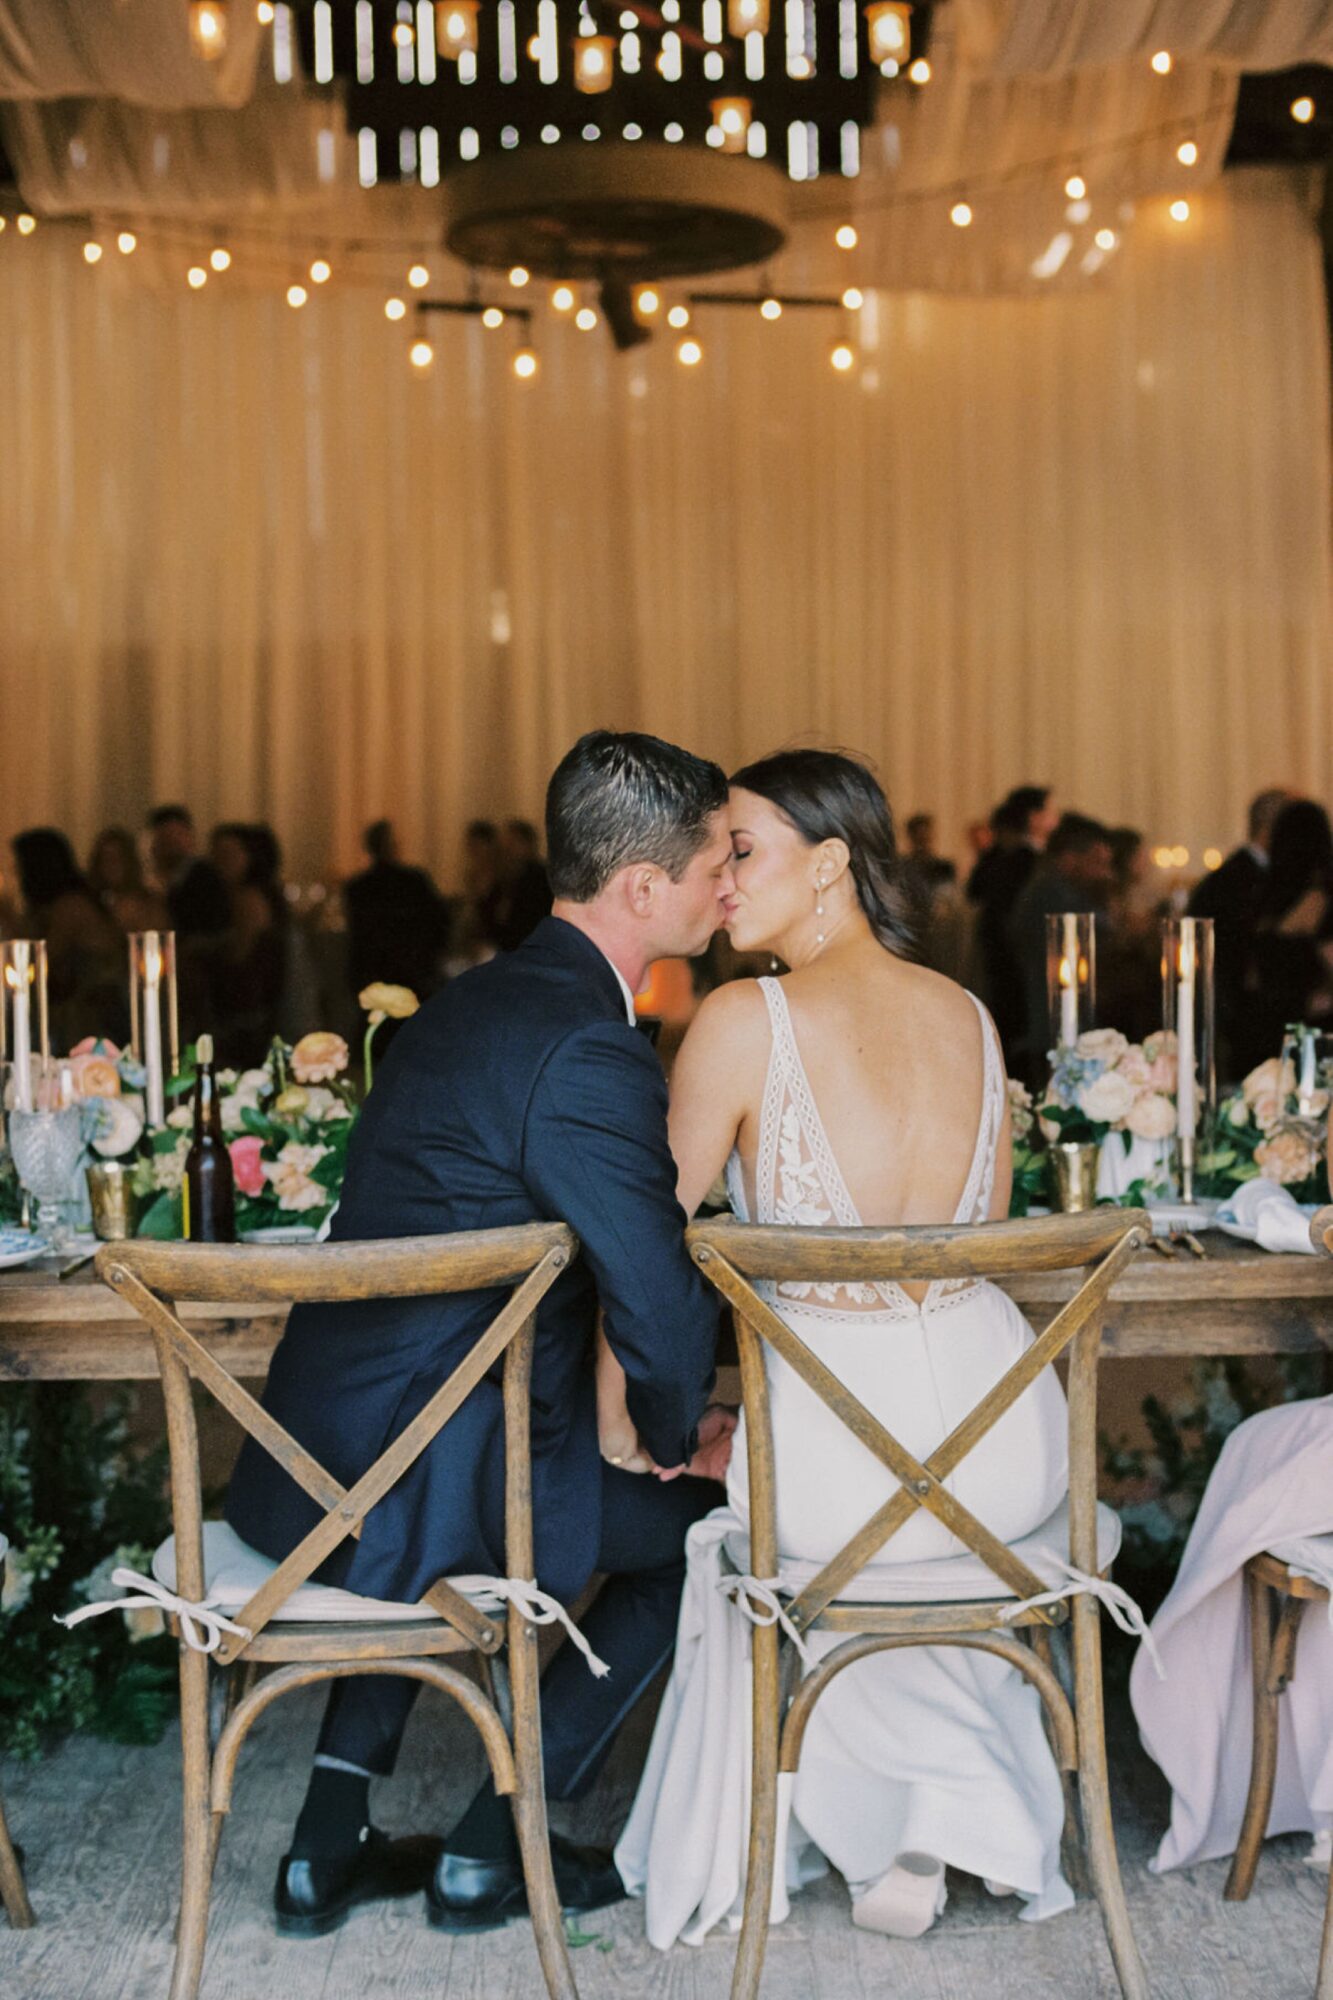 Bride and groom kissing at reception dinner inside the barn at at the White Barn Edna Valley photographed by san luis obispo wedding photographers jessica sofranko